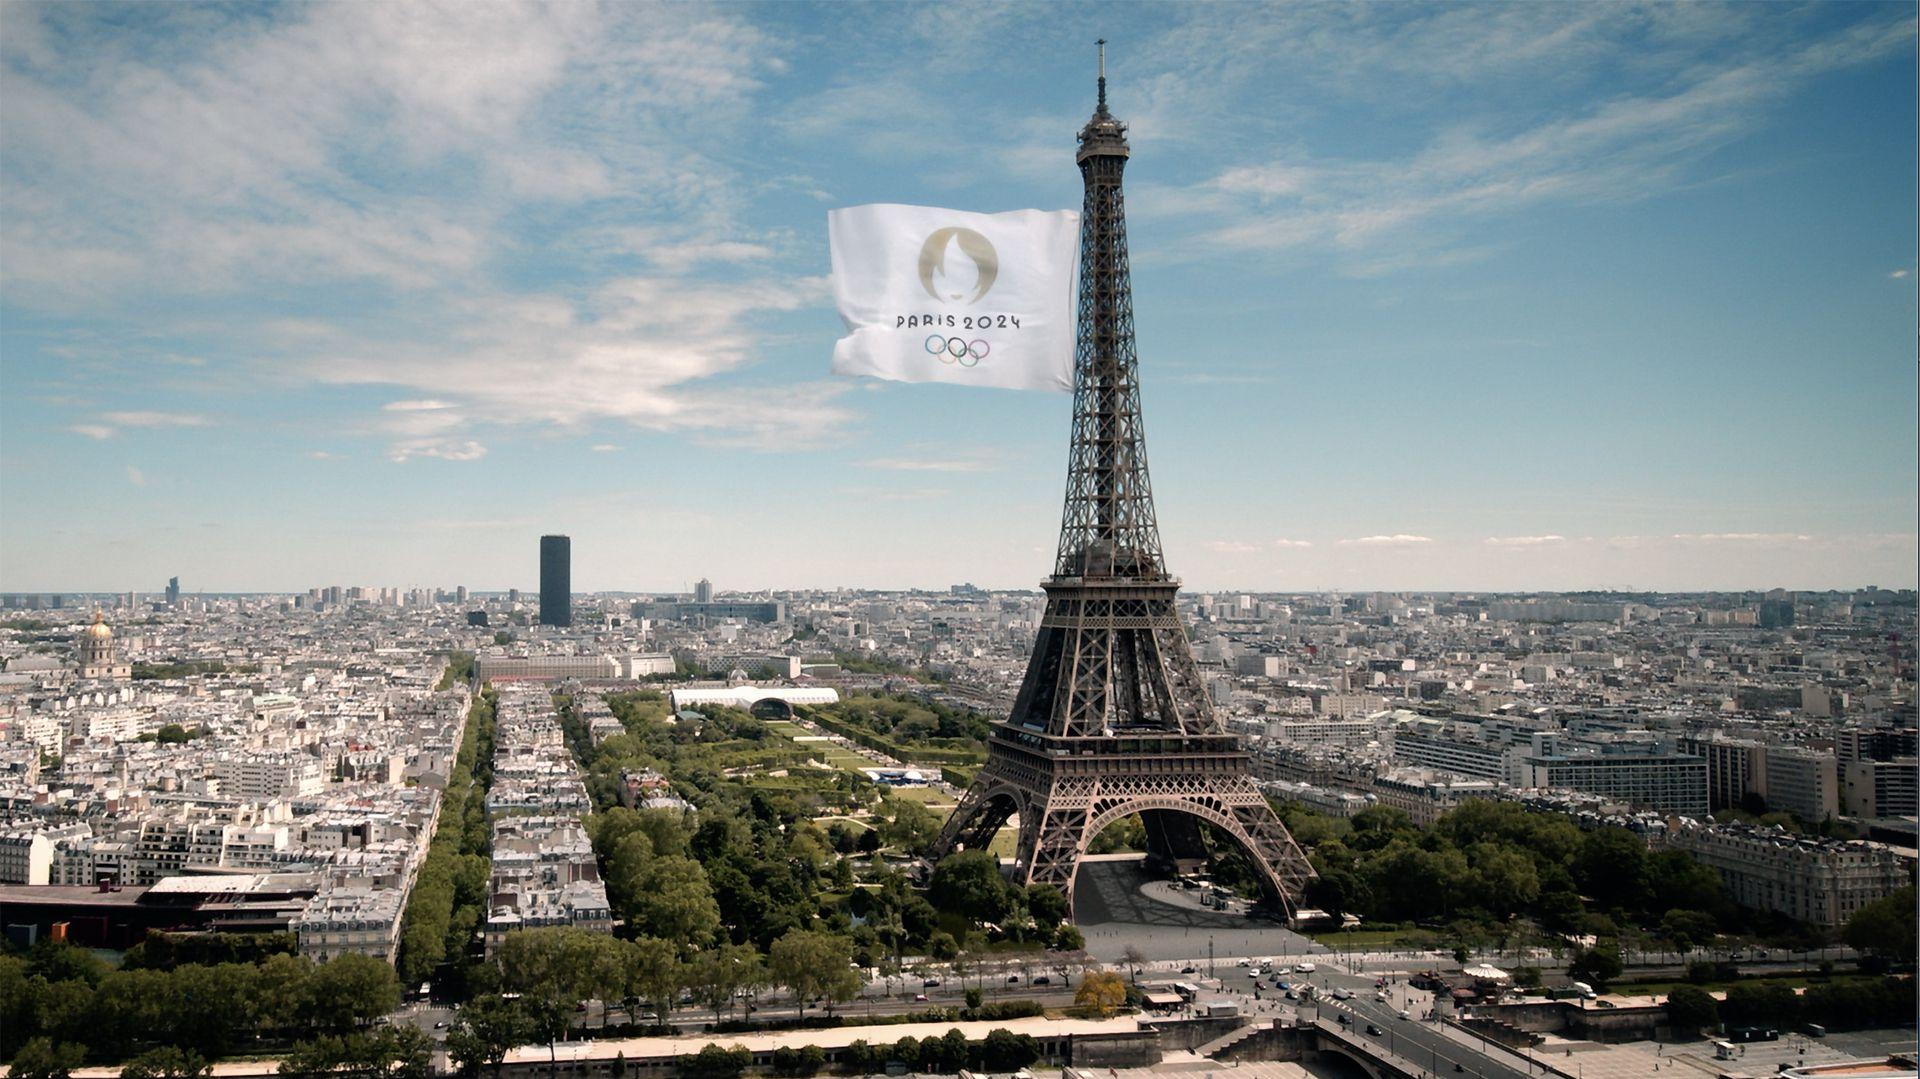 Obs Will Reveal News About The Paris Olympics At 4k HDr